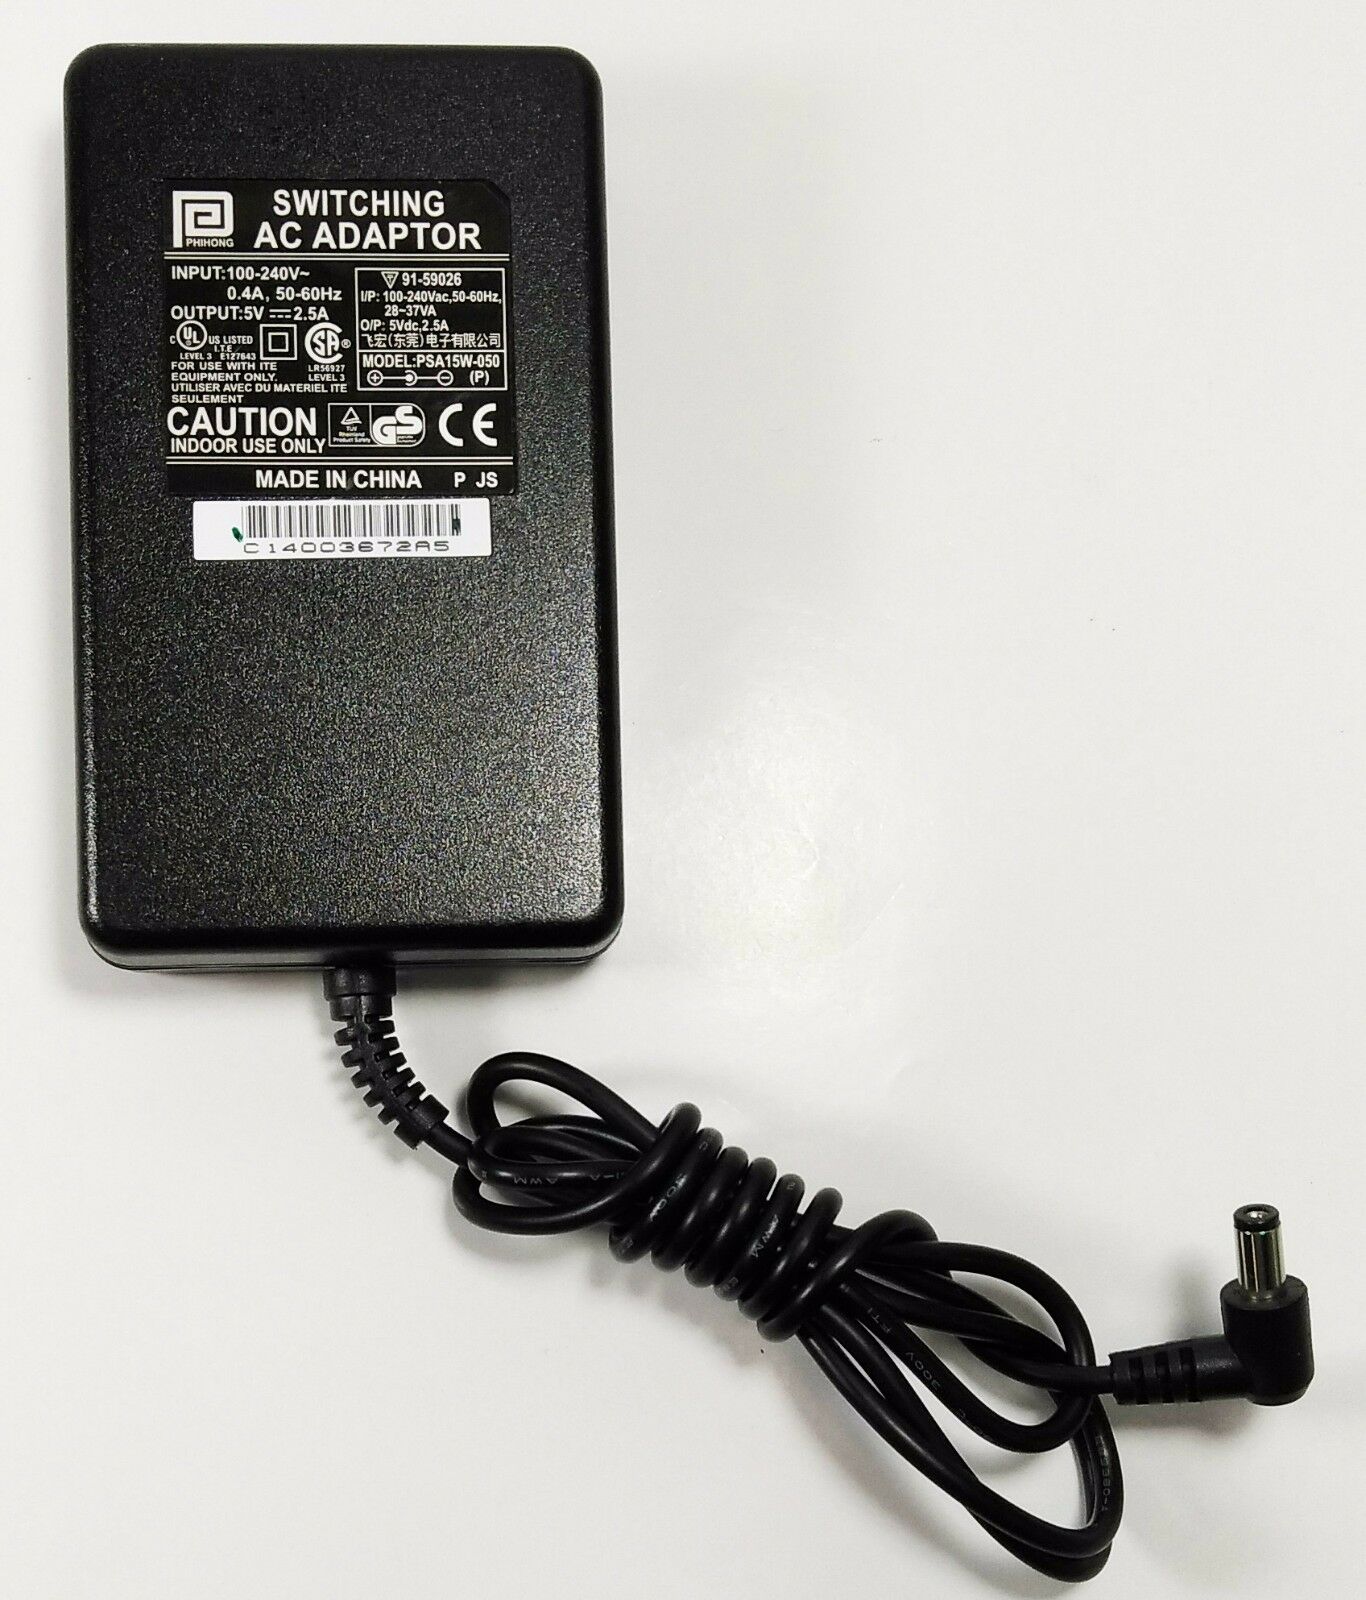 NEW 5V 2.5A PHIHONG PSA15W-050 Switching AC Adapter